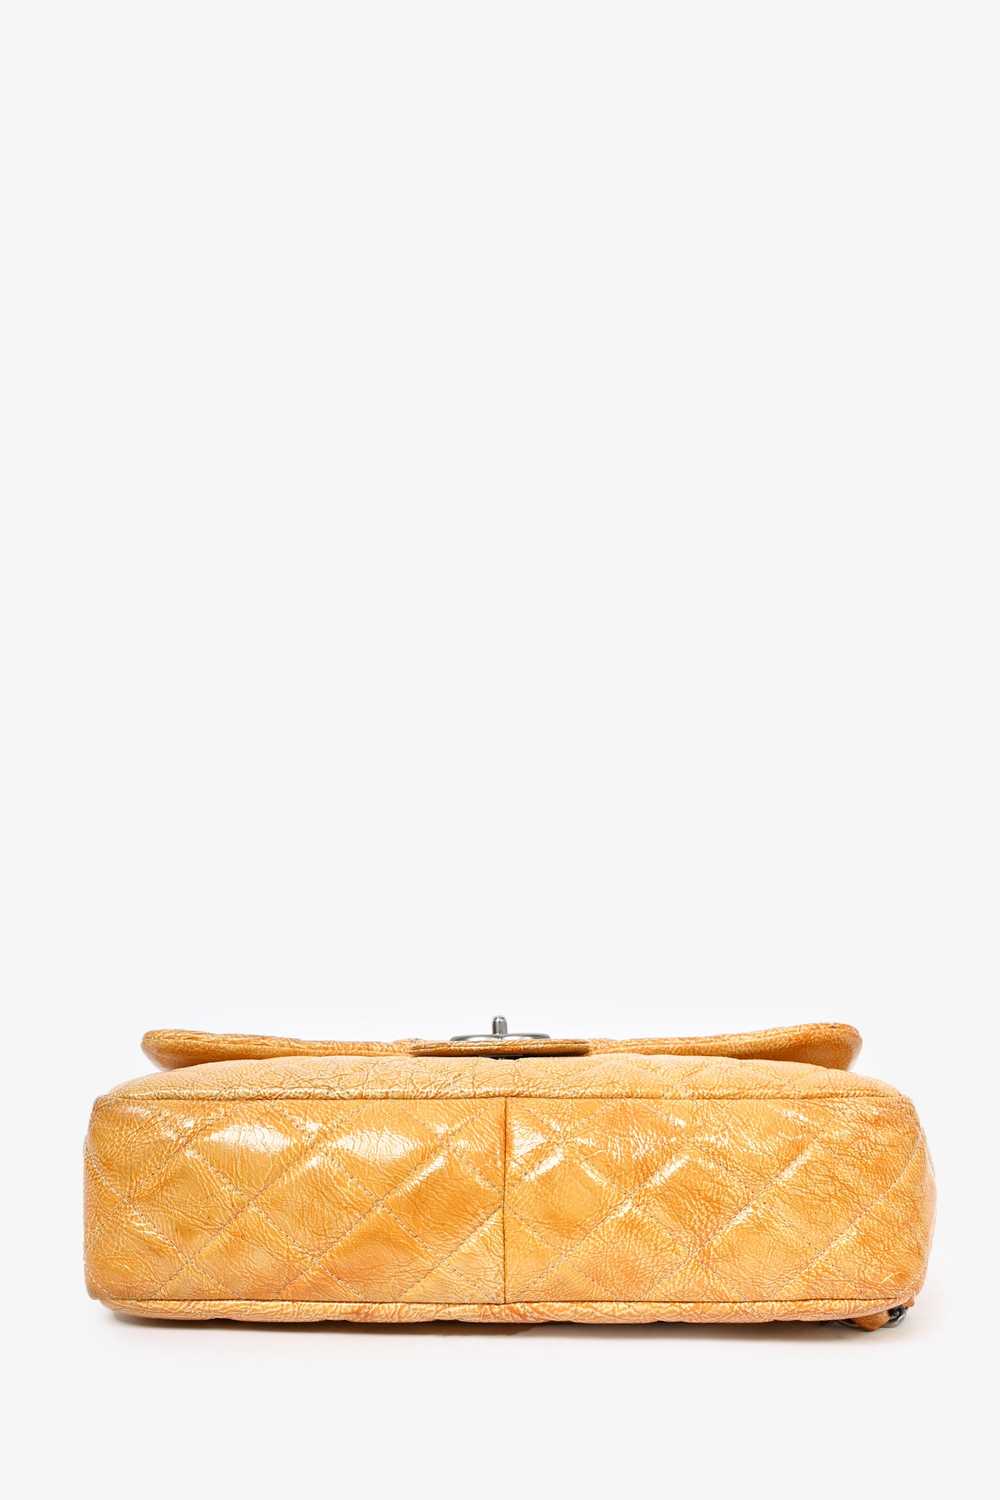 Pre-Loved Chanel™ 2008 Yellow Crinkled Patent Lea… - image 5